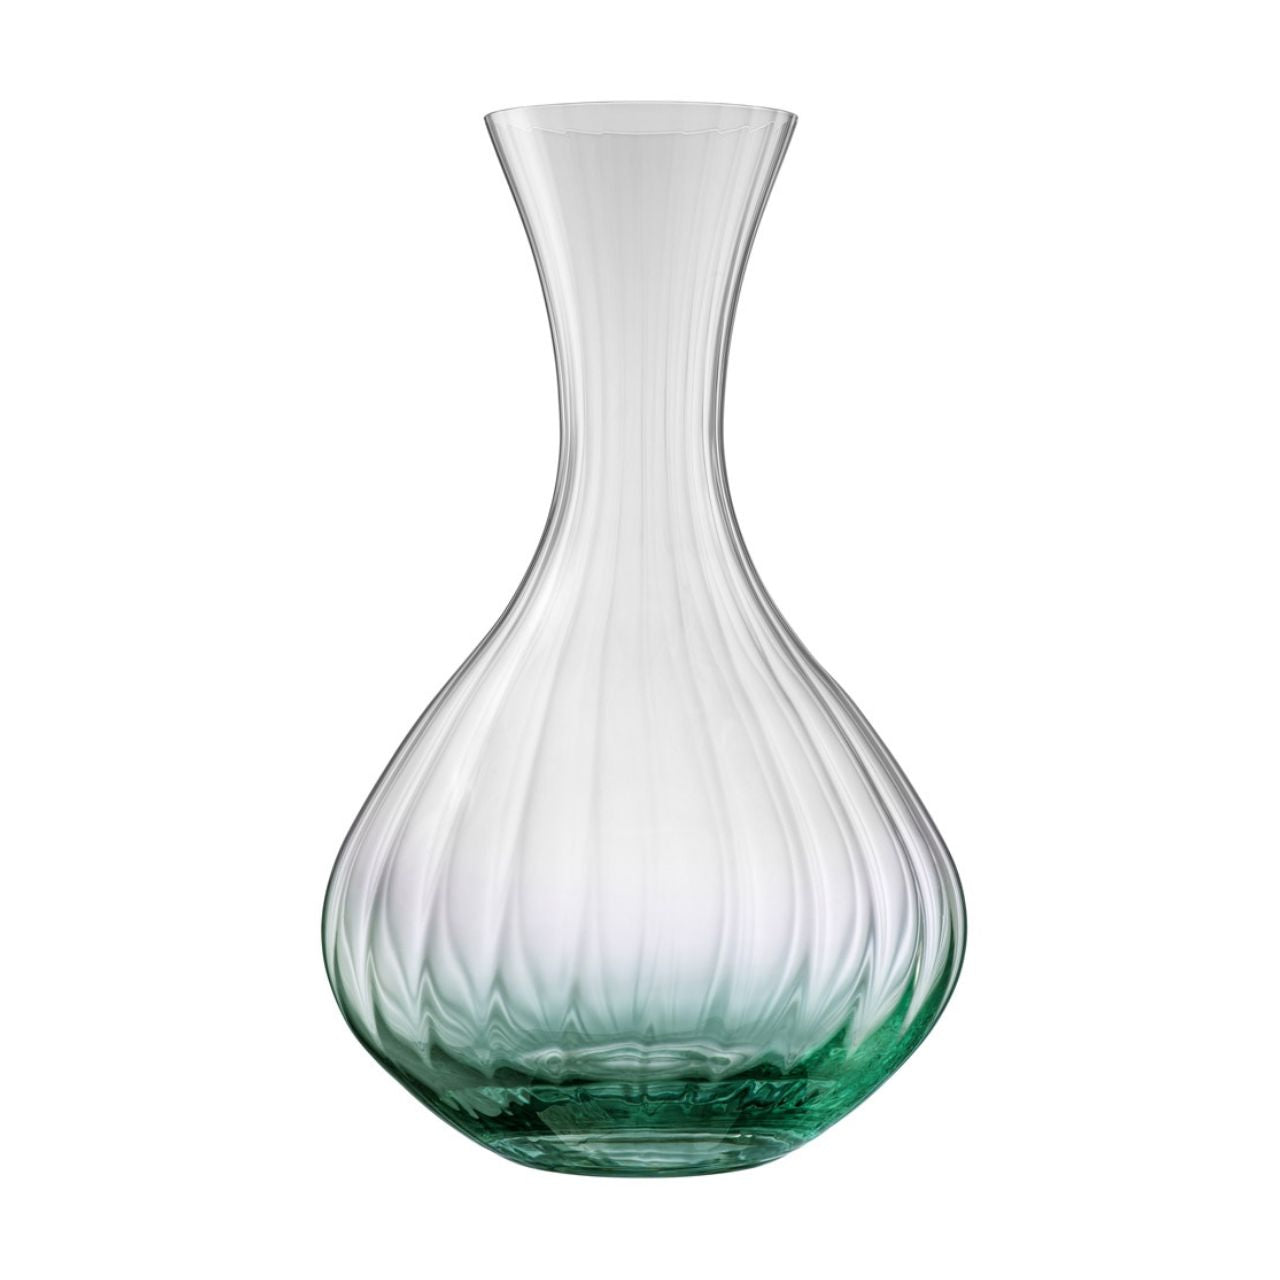 Galway Crystal Erne Carafe Aqua  This beautifully crafted Galway Crystal carafe with a aqua coloured base is an elegant must have barware piece. The long tapered neck makes the carafe easy to hold and pour and the Erne design has light lines along the body of the carafe adding a stylish finish.